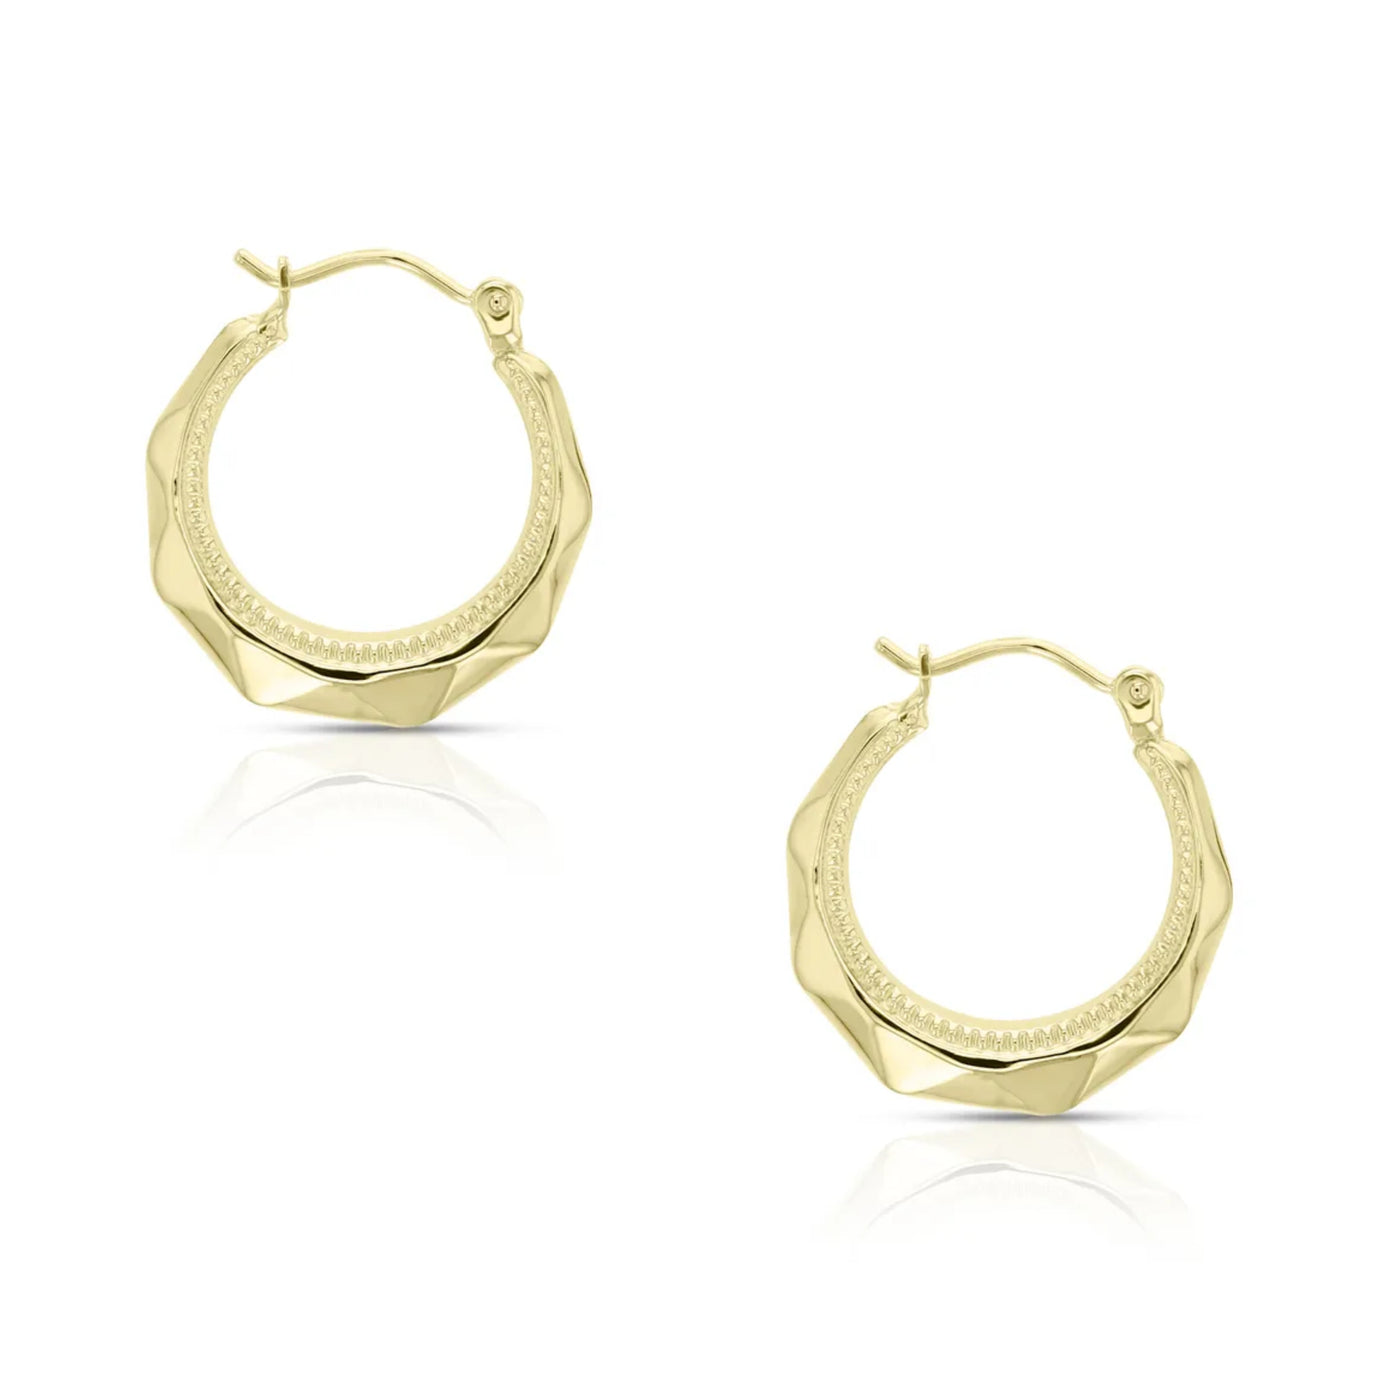 9ct Yellow Gold Faceted Crescent Shape Hoop Earrings.